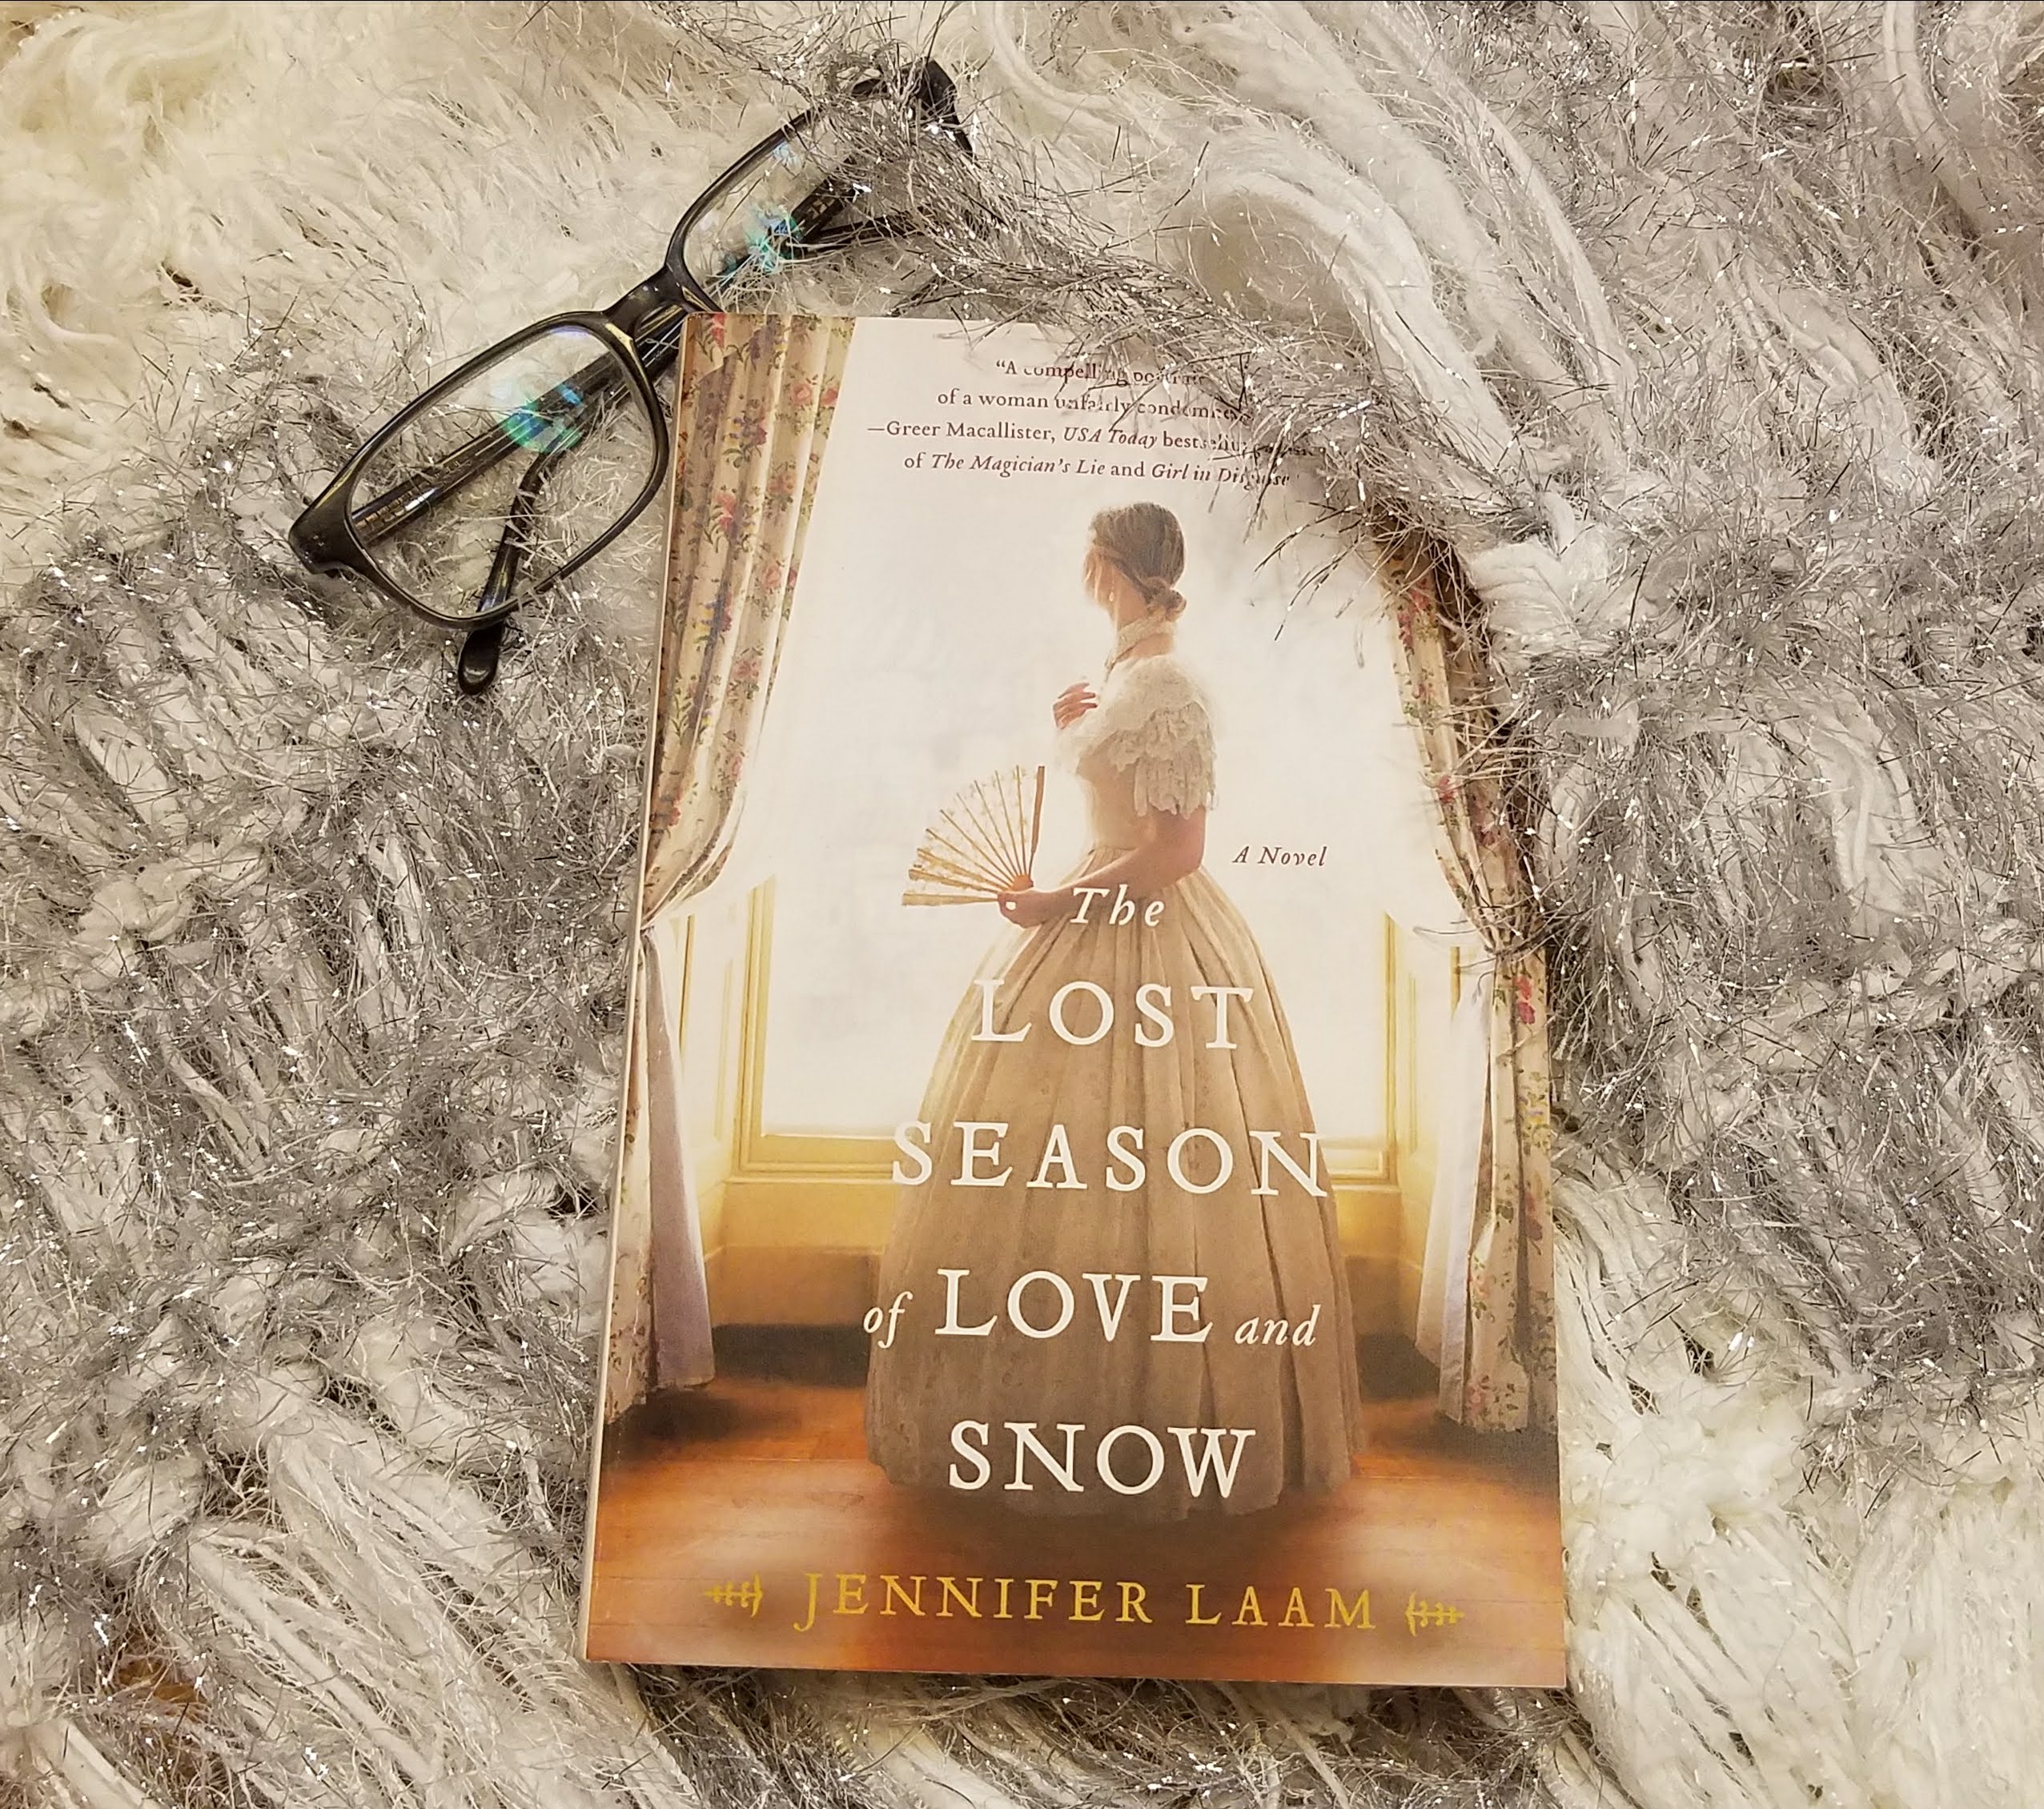 The Lost Season of Love and Snow by Jennifer Laam – Book Review with Giveaway